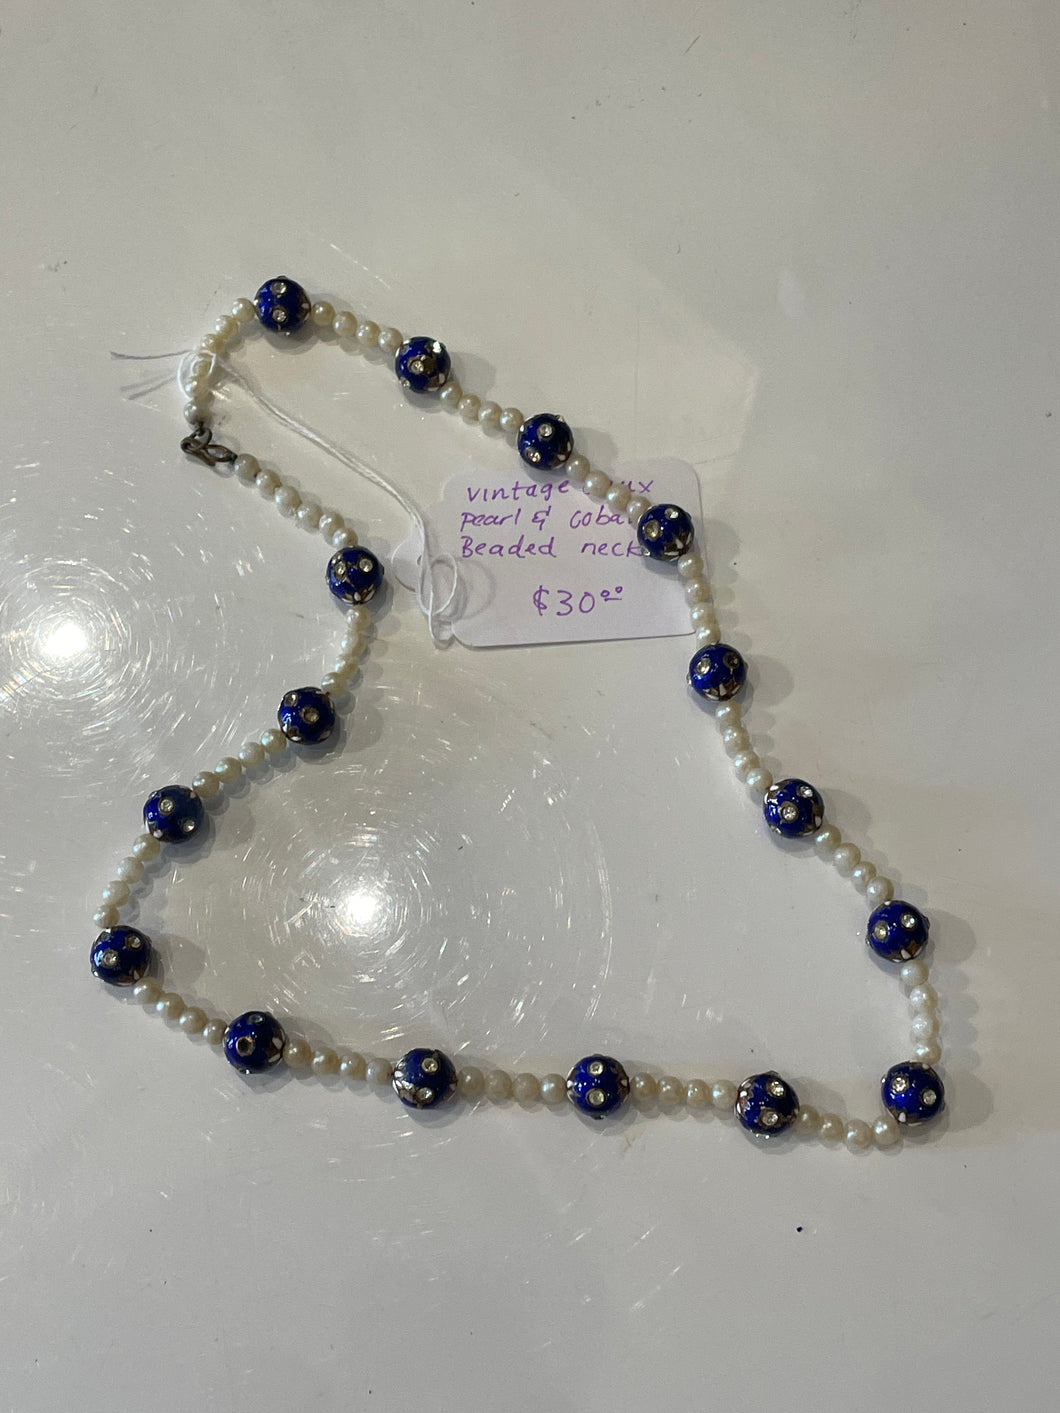 Vintage Faux Pearl and Cobalt Beaded Necklace